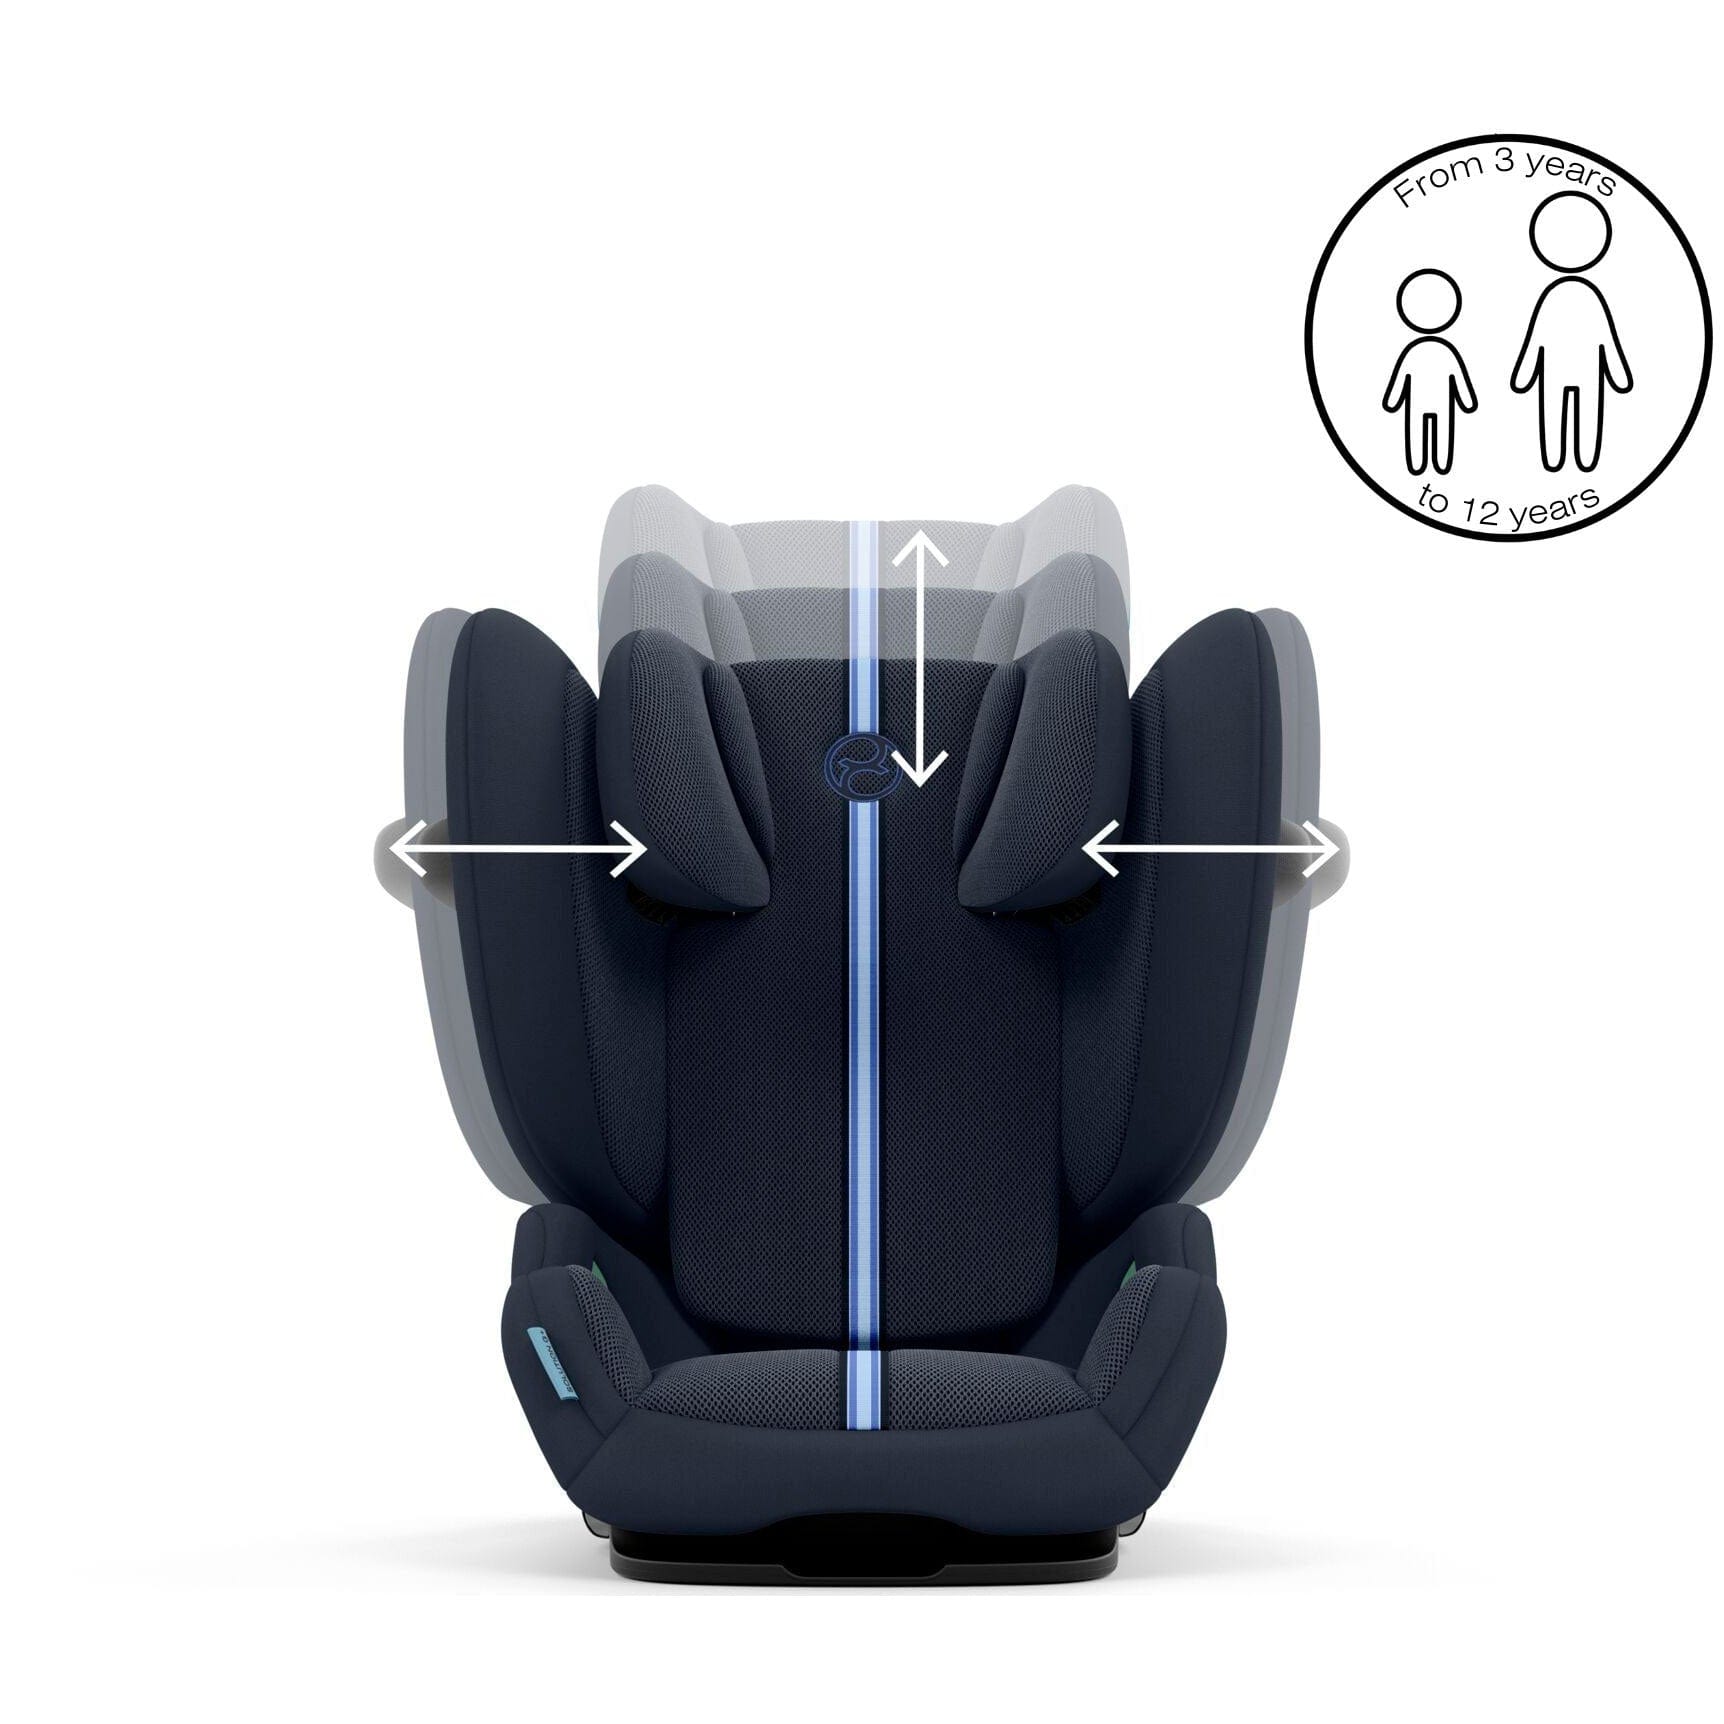 Cybex Solution G i-Fix Plus Highback Booster Car Seat in Ocean Blue Highback Booster Seats